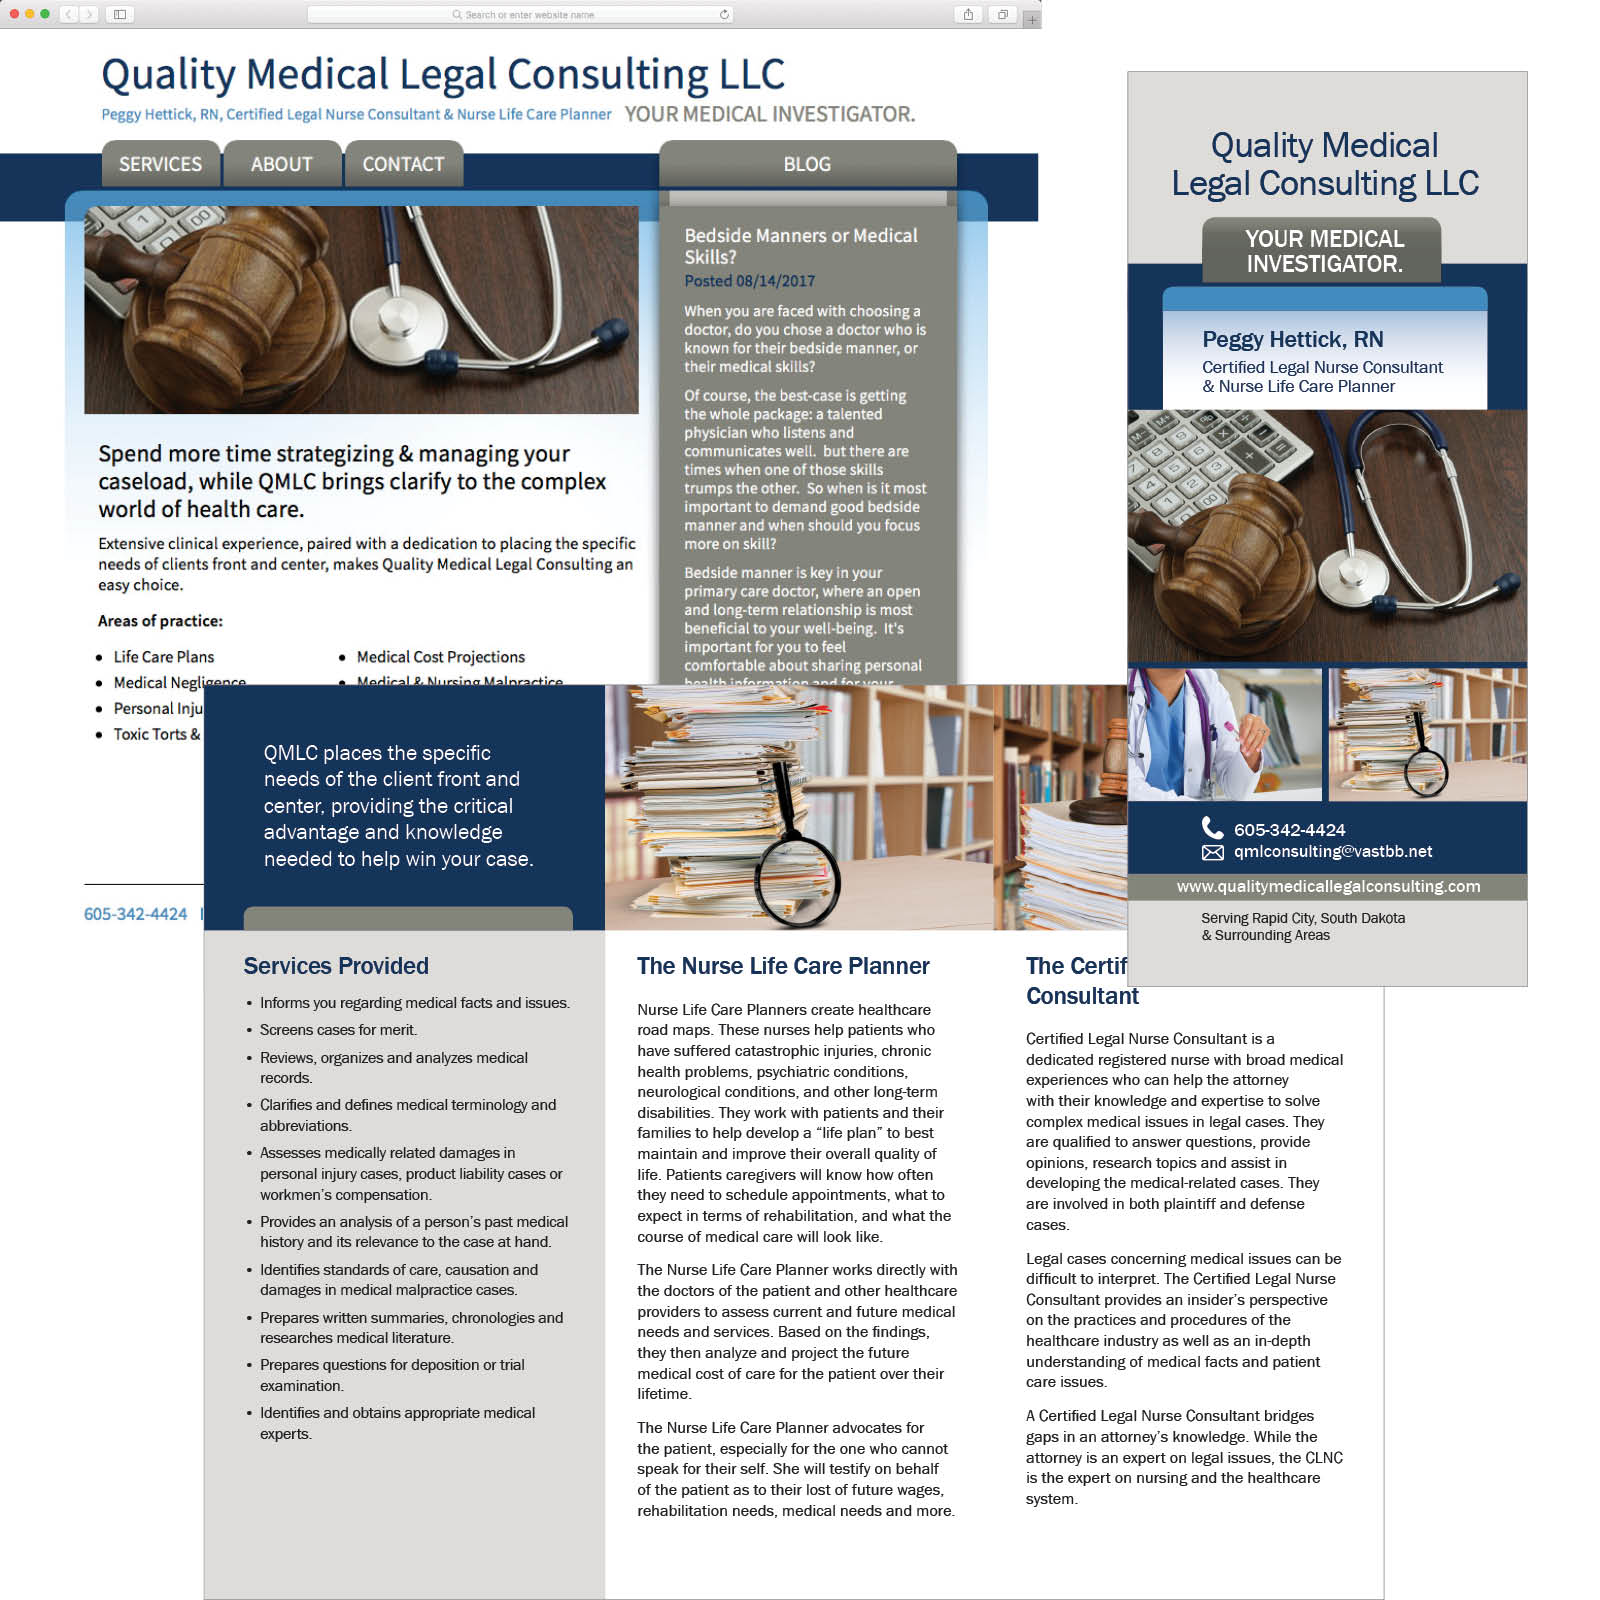 Quality Medical Legal Consulting